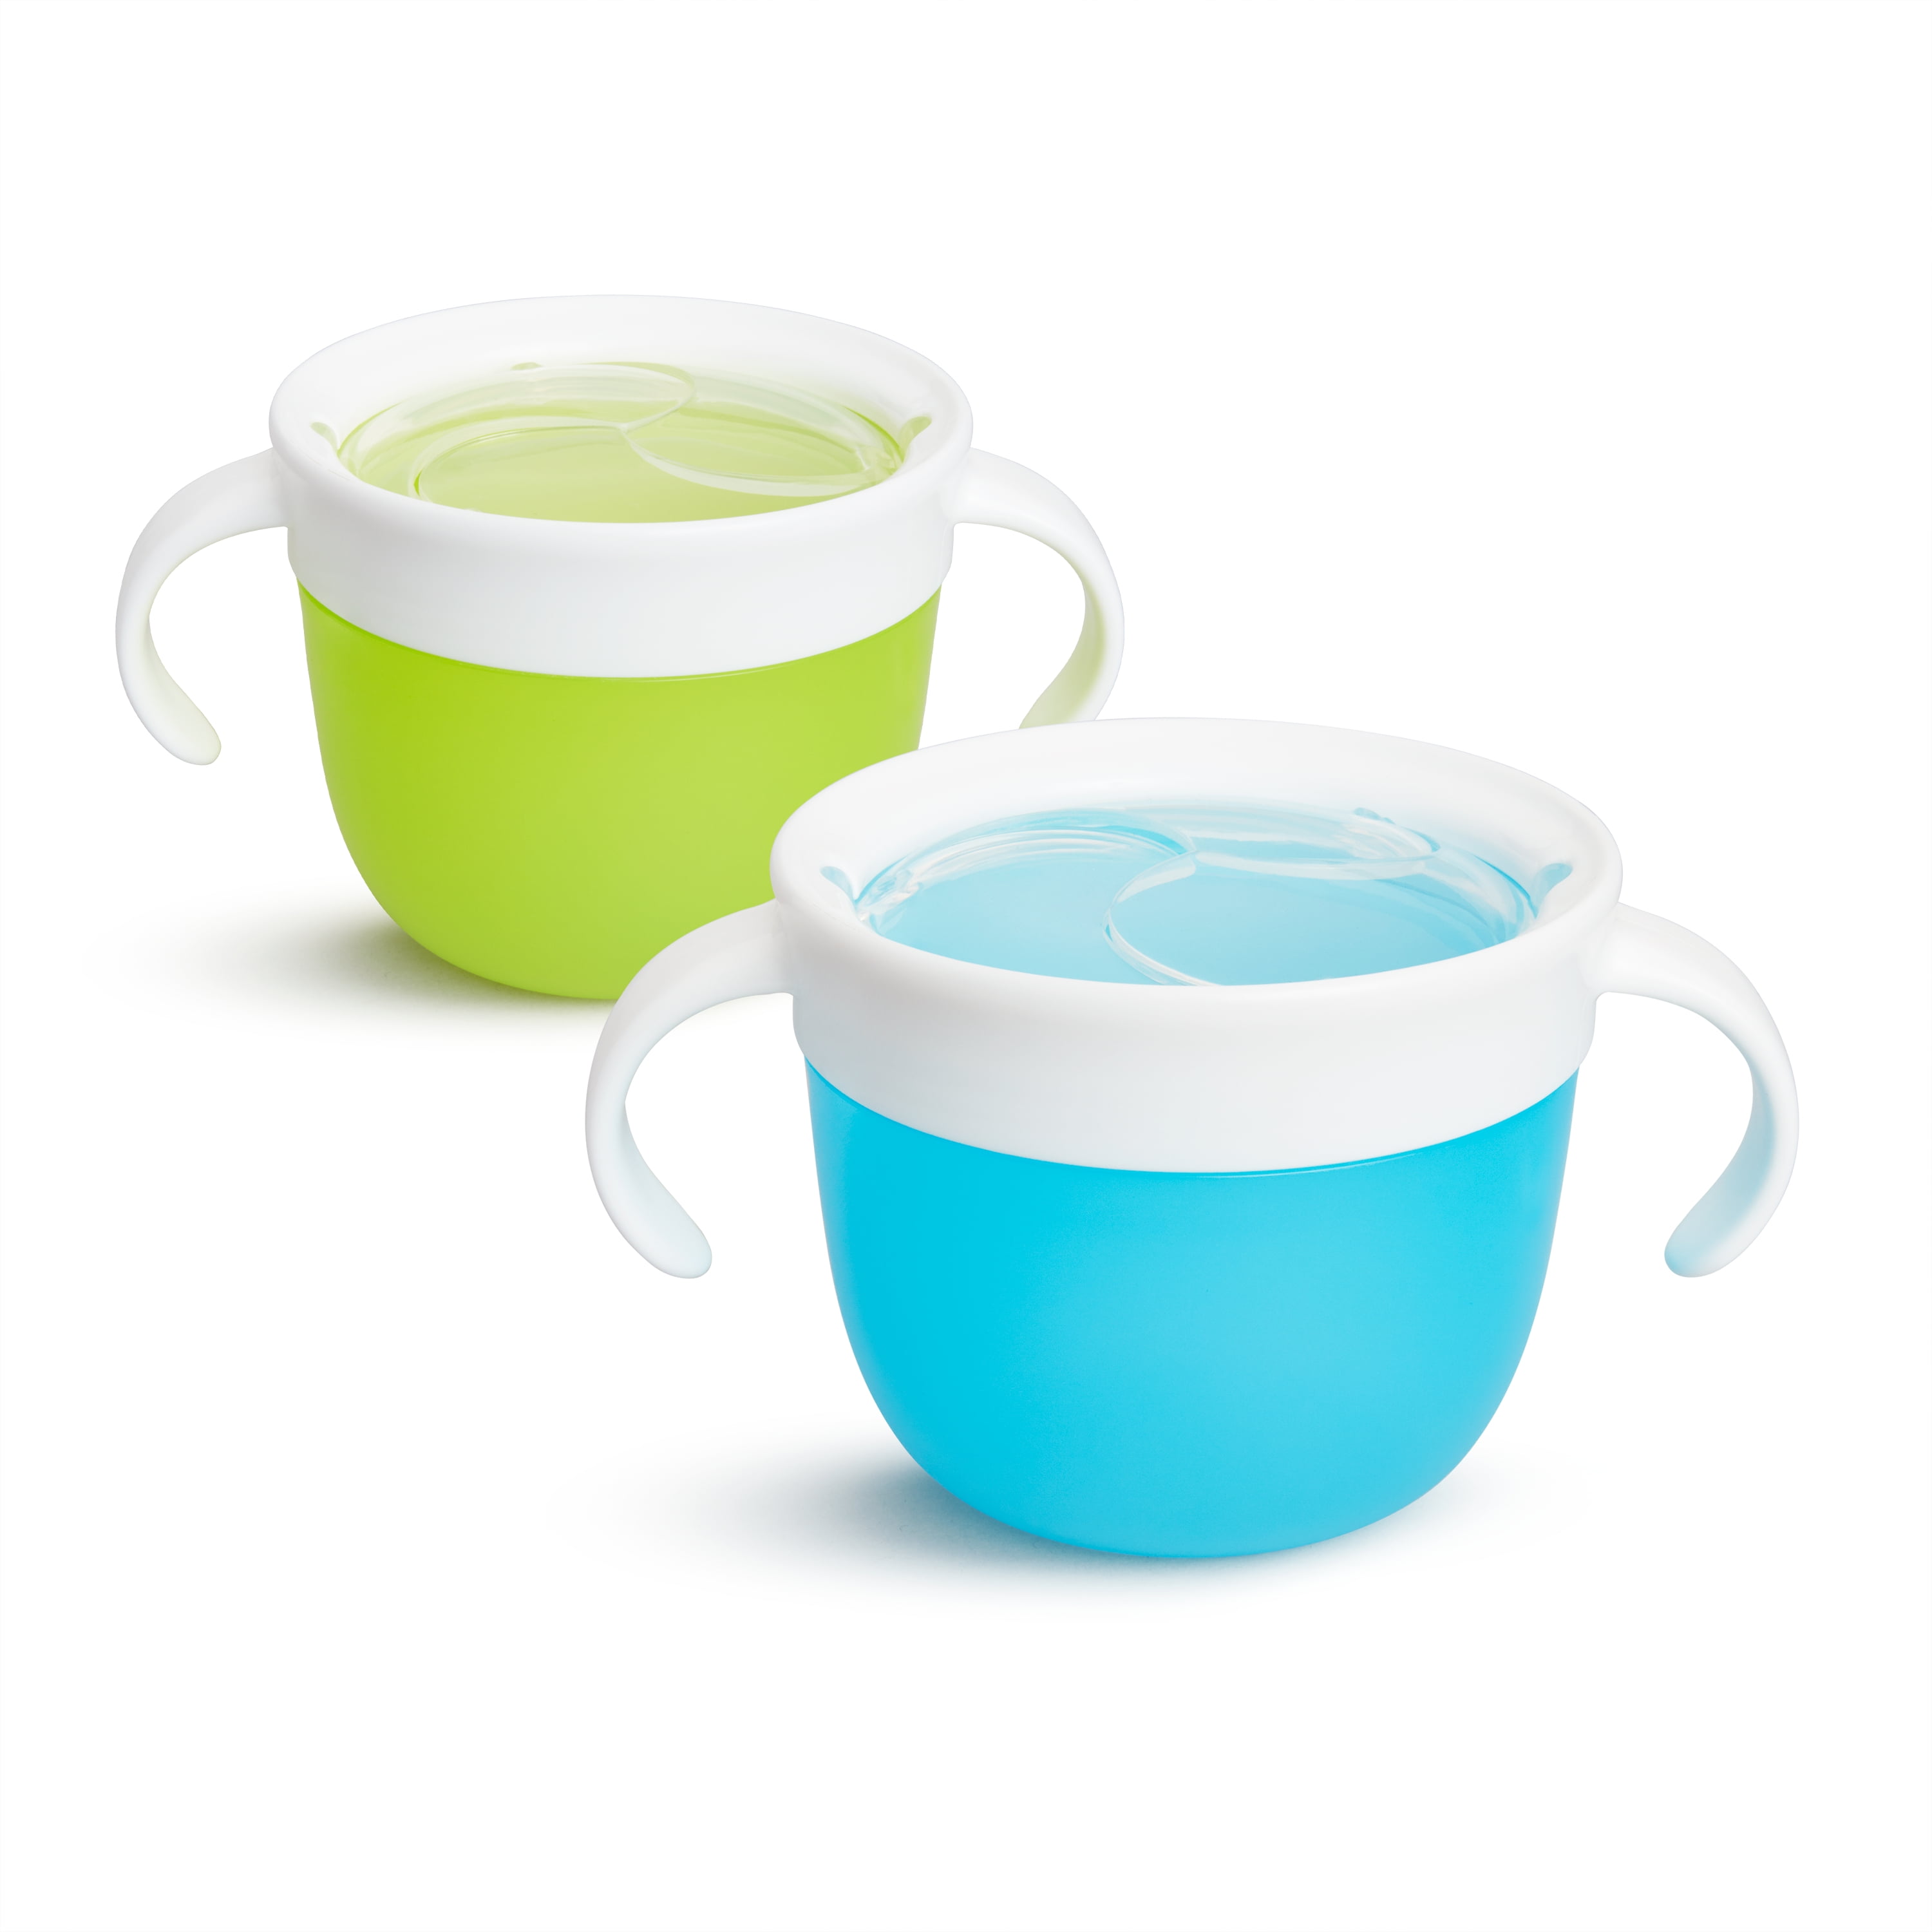 SnackCatch & Sip™ 2-in-1 Snack Catcher & Spill-Proof Cup, 9oz